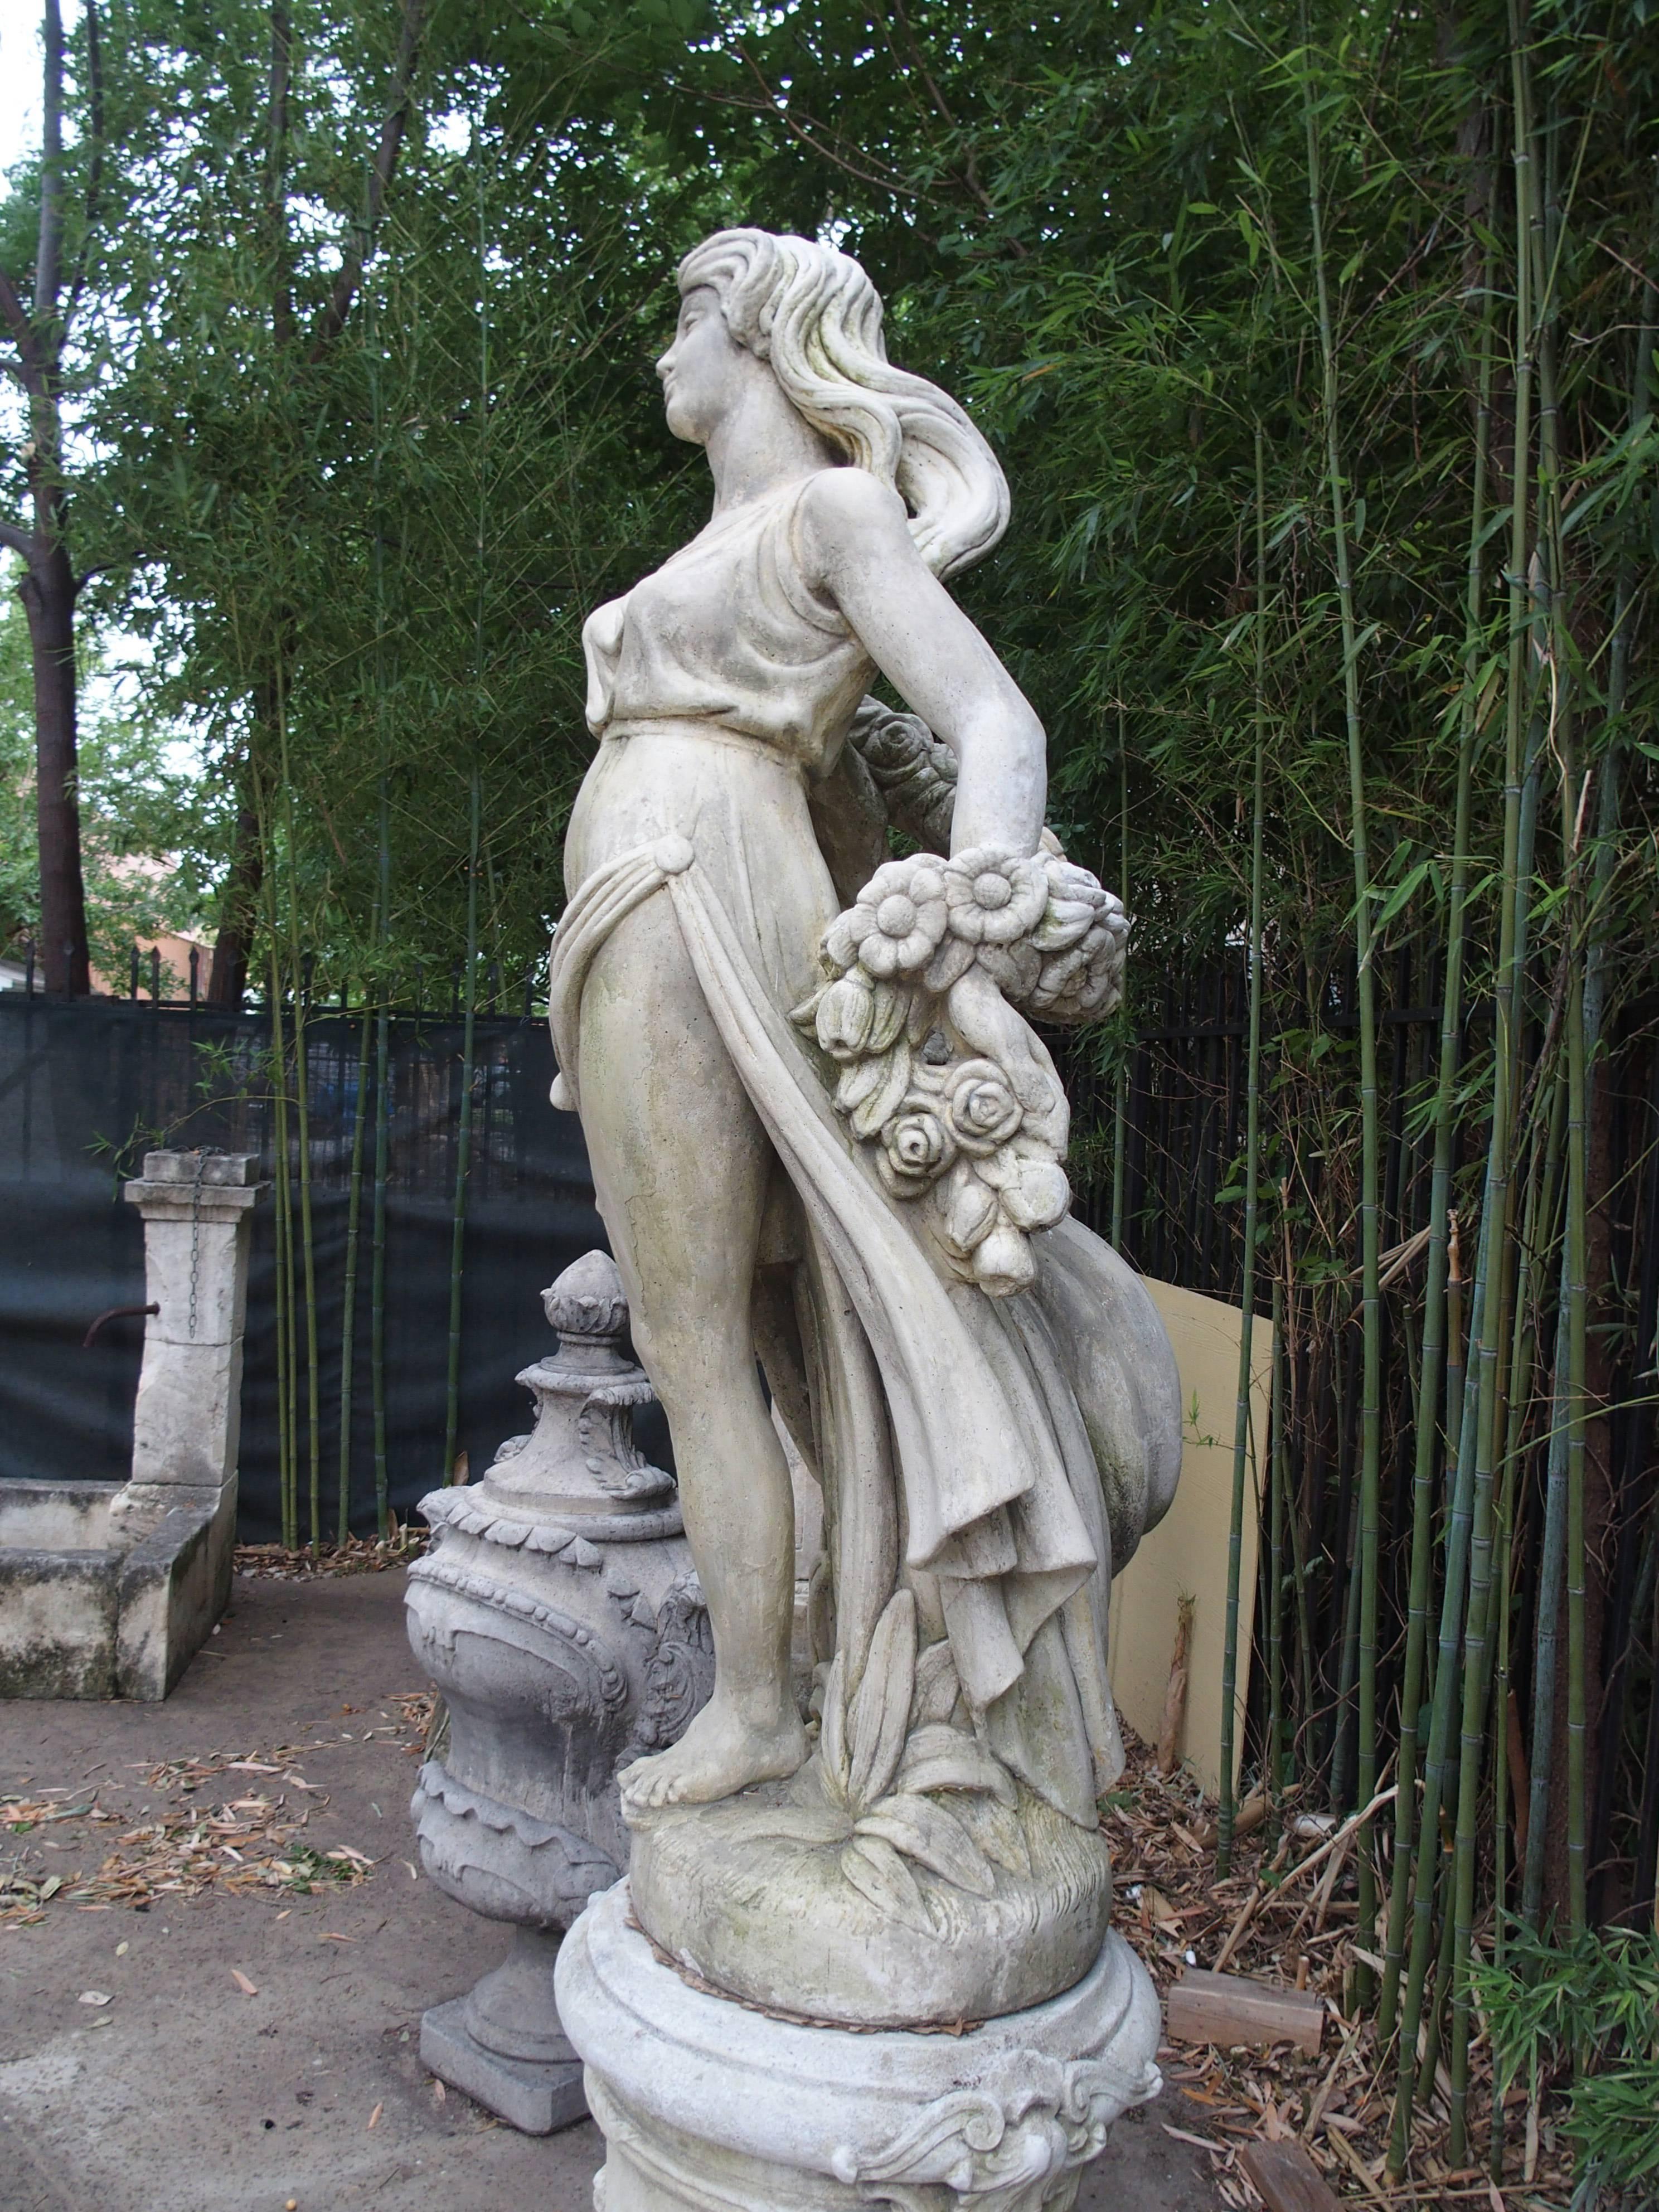 This beautiful French, life-sized statue depicts a woman in Roman style costume, striding confidently with her long hair, dress and a garland of roses flowing to the back. This French stone statue could be used indoors or outside and would be a